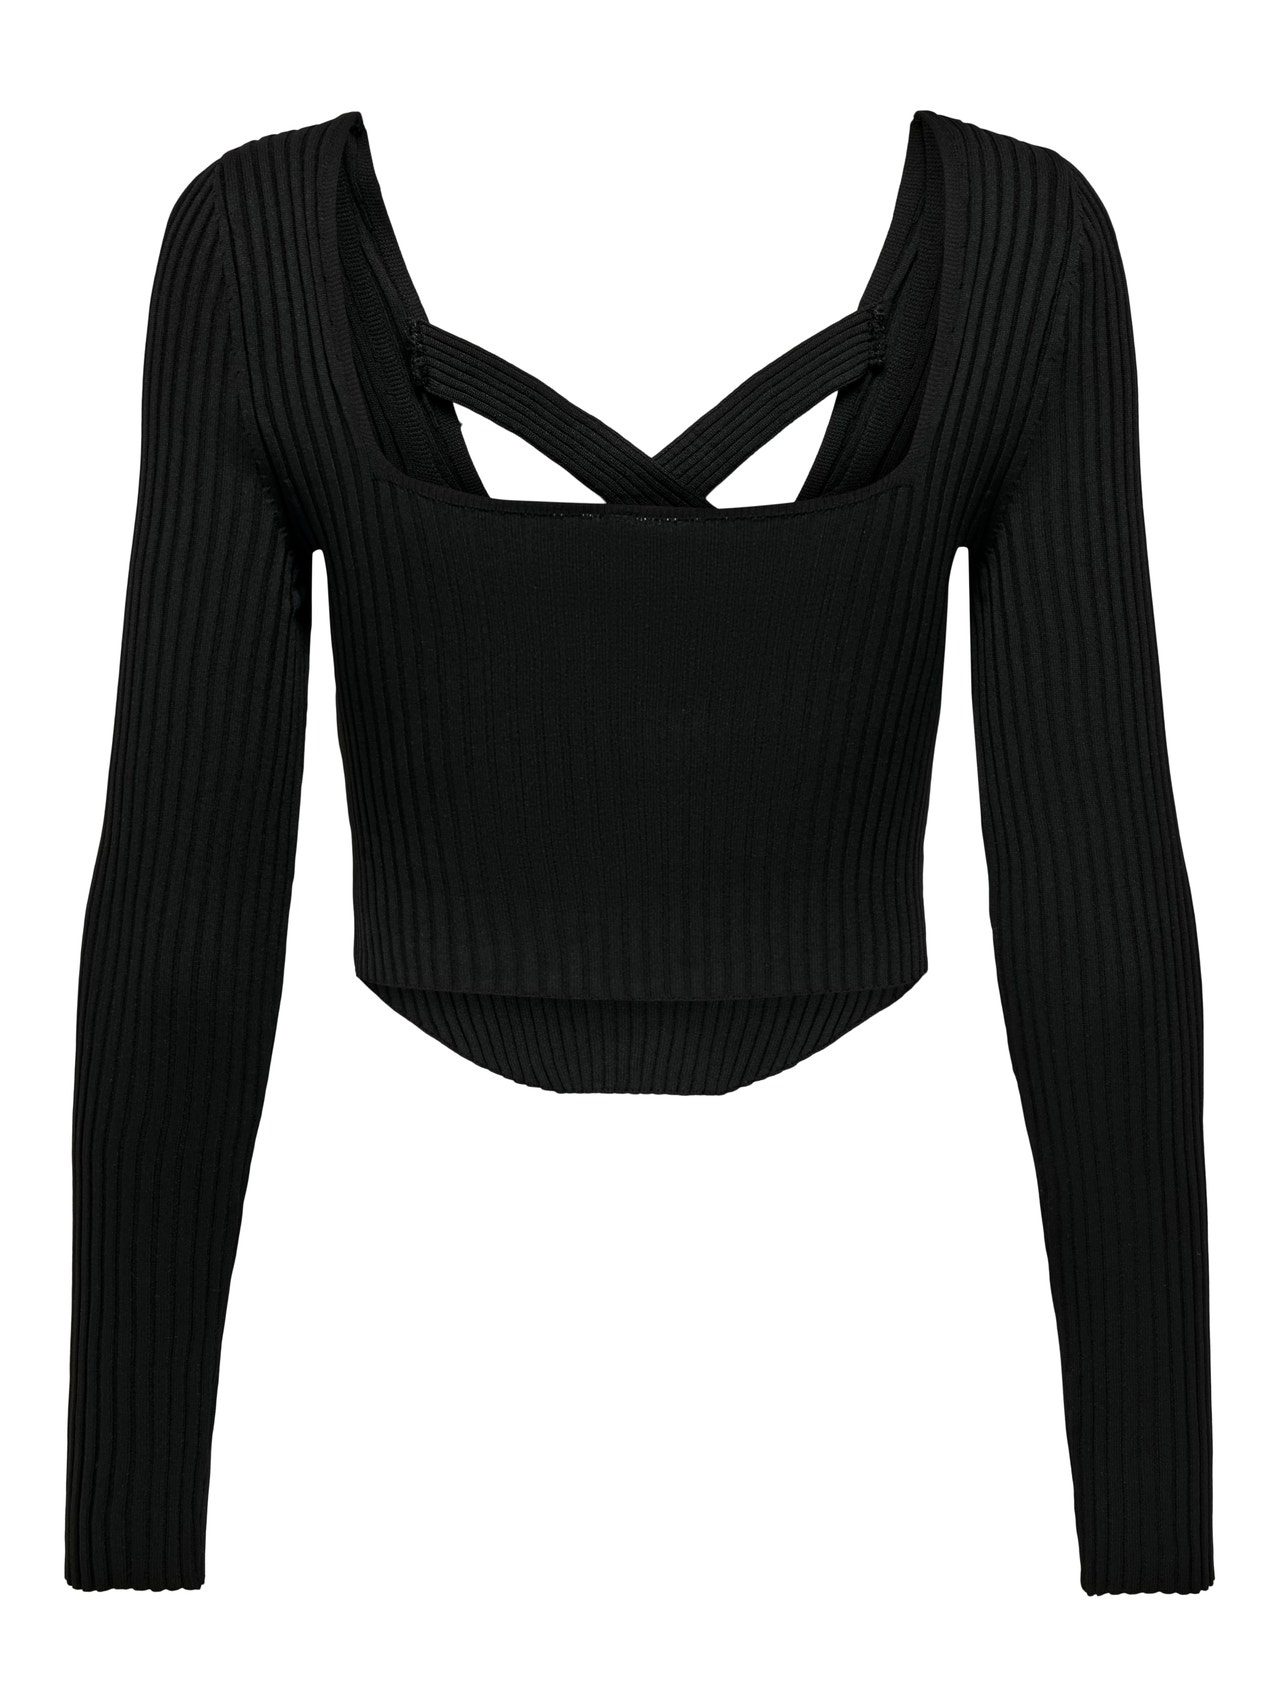 ONLY Knitted top with square neck -Black - 15300377